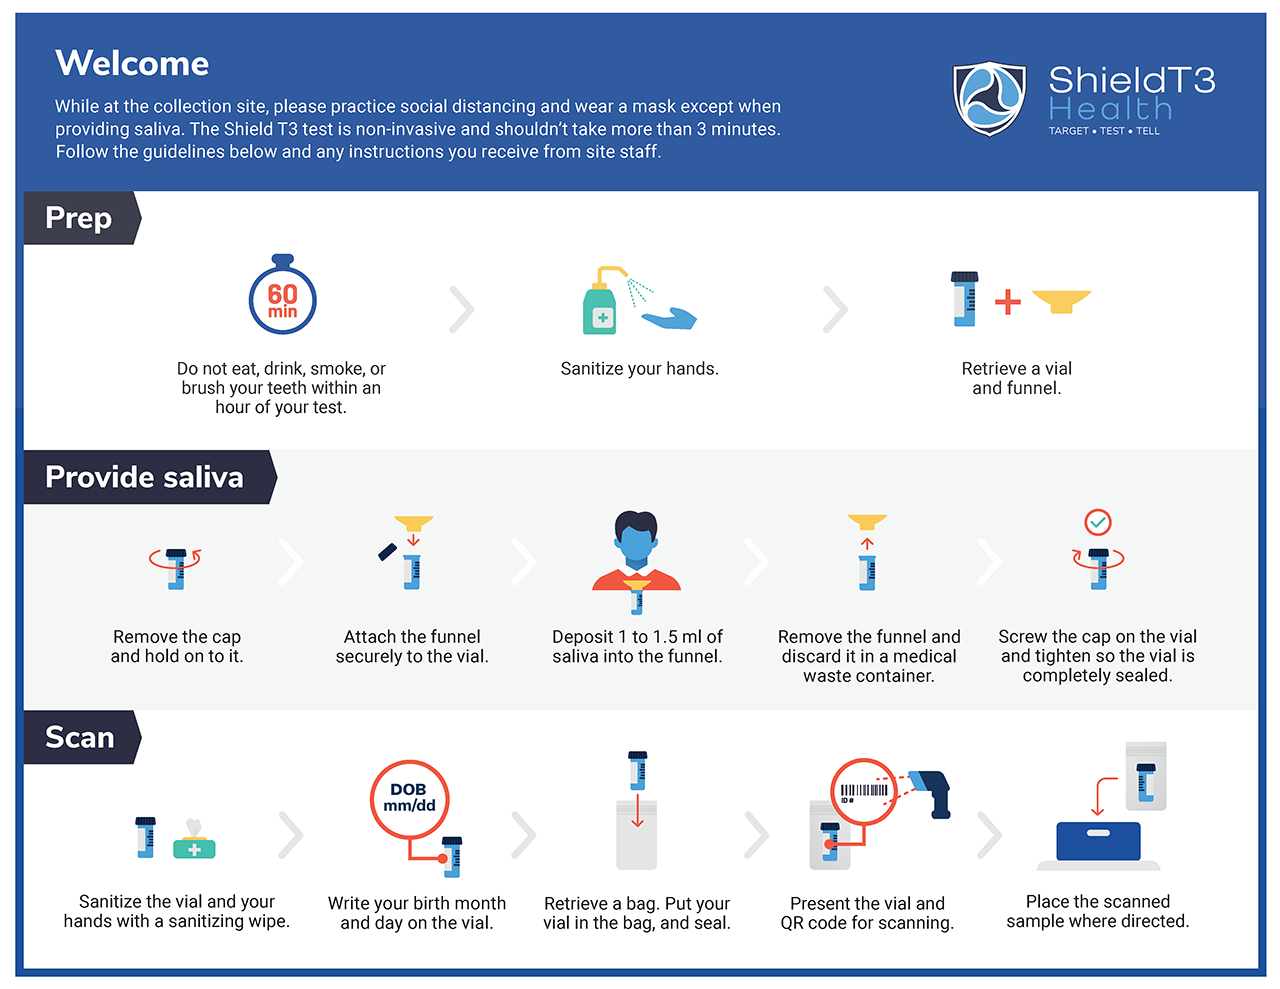 Infographic describing the ShieldT3 site collection process: Beforehand, do not eat, drink, smoke or brush your teeth. Do sanitize your hands.  Retrieve a vial and funnel. Remove the vial cap and hold onto it. Attach the funnel securely to the vial. Deposit a small amount of saliva into the funnel. Remove the funnel and discard it. Screw the cap on the vial and tighten. Sanitize the vial, put it into the bag and seal the bag. Present the bag and the QR for scanning. Place the scanned sample where directed.